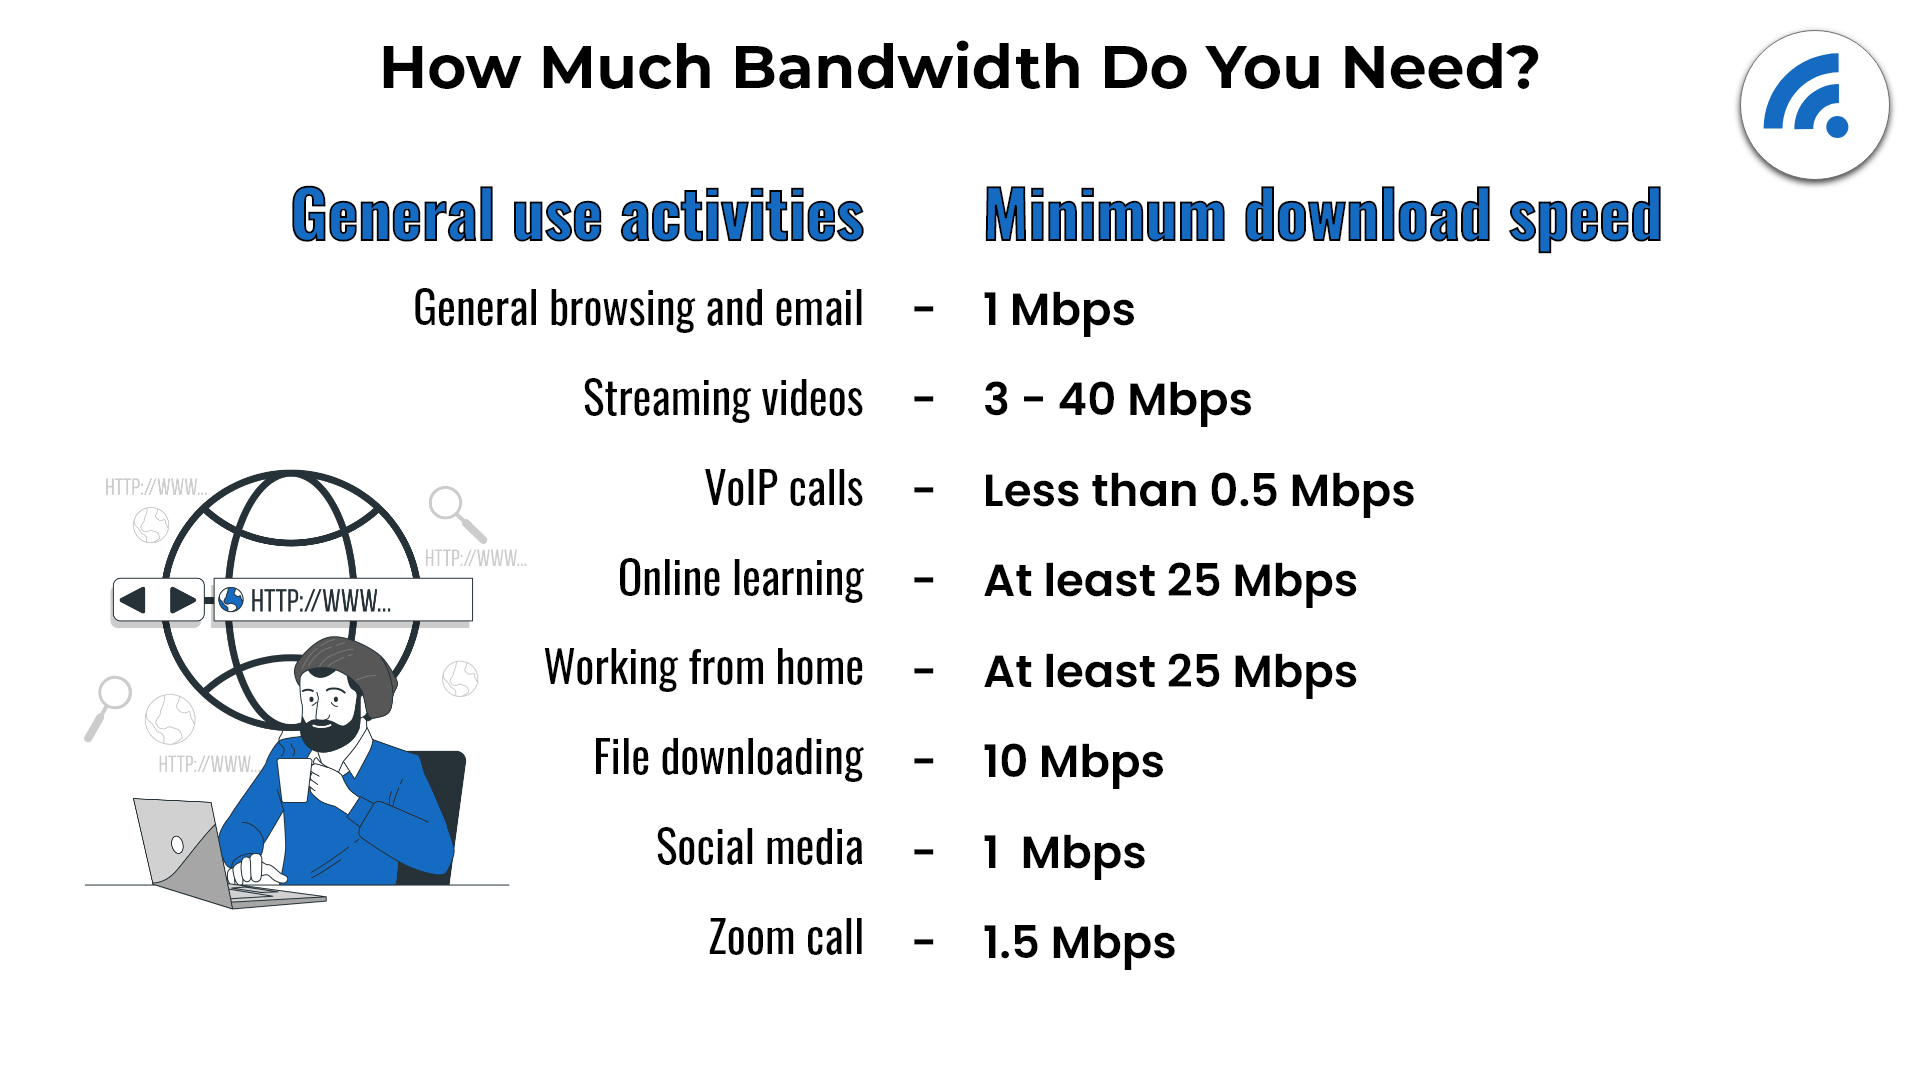 How much bandwidths are needed for general use activities